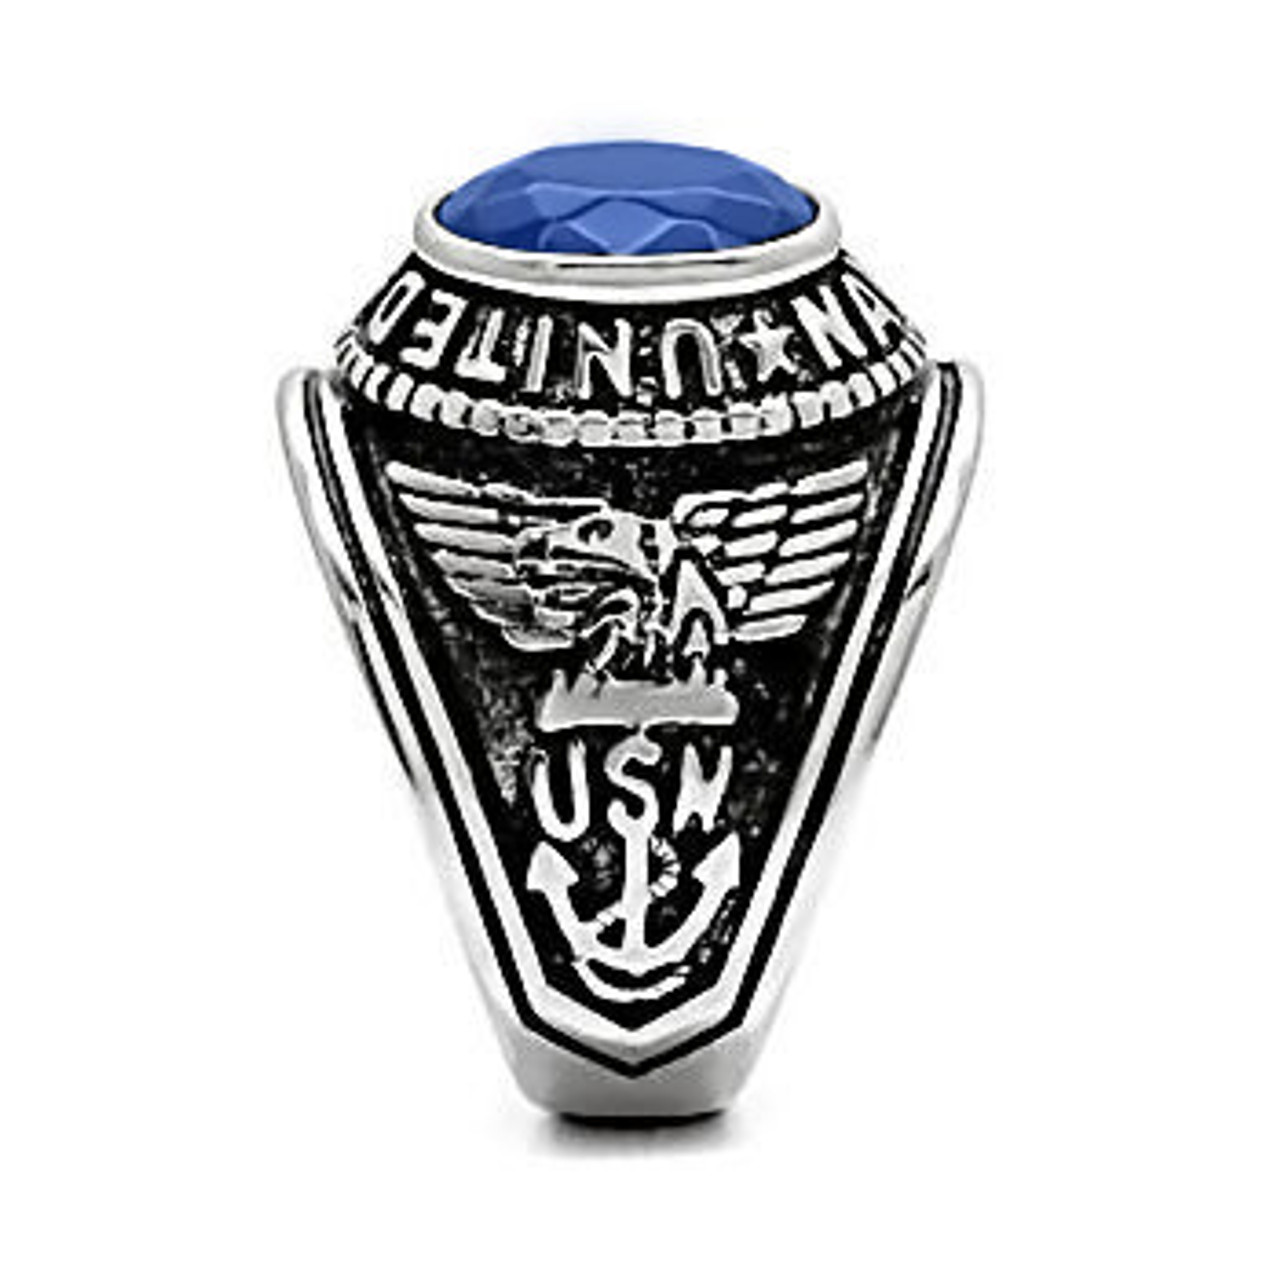 Navy - USN Military Ring (Stainless Steel with Blue Stone)